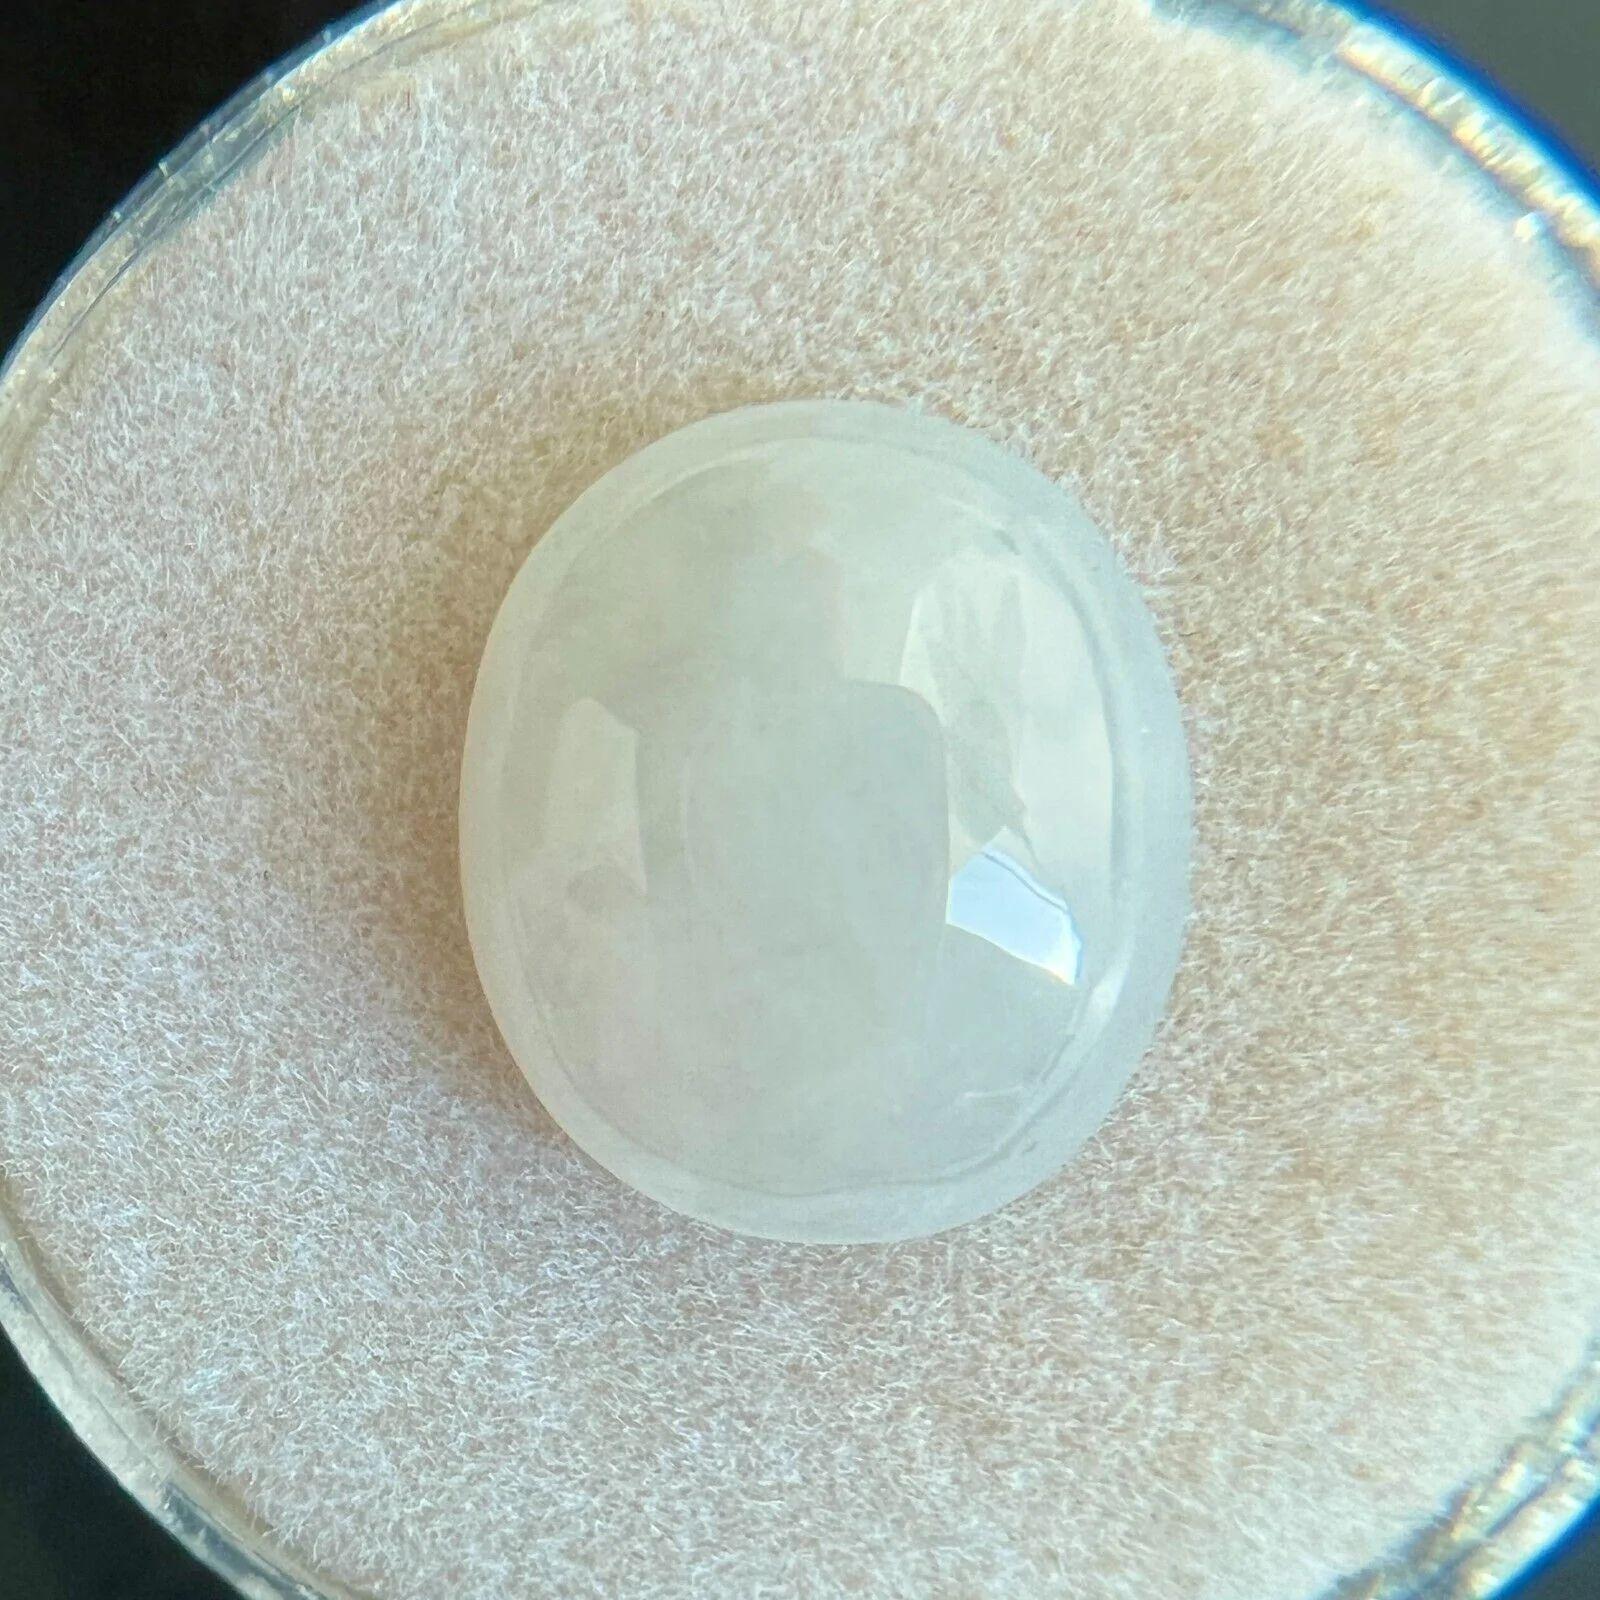 4.53ct White Jadeite Jade IGI Certified ‘A’ Grade Oval Cabochon Rare Gem

IGI Certified Untreated A Grade White Jadeite Gemstone.
4.53 Carat with an excellent oval cabochon cut. Fully certified by IGI in Antwerp, one of their best and most well